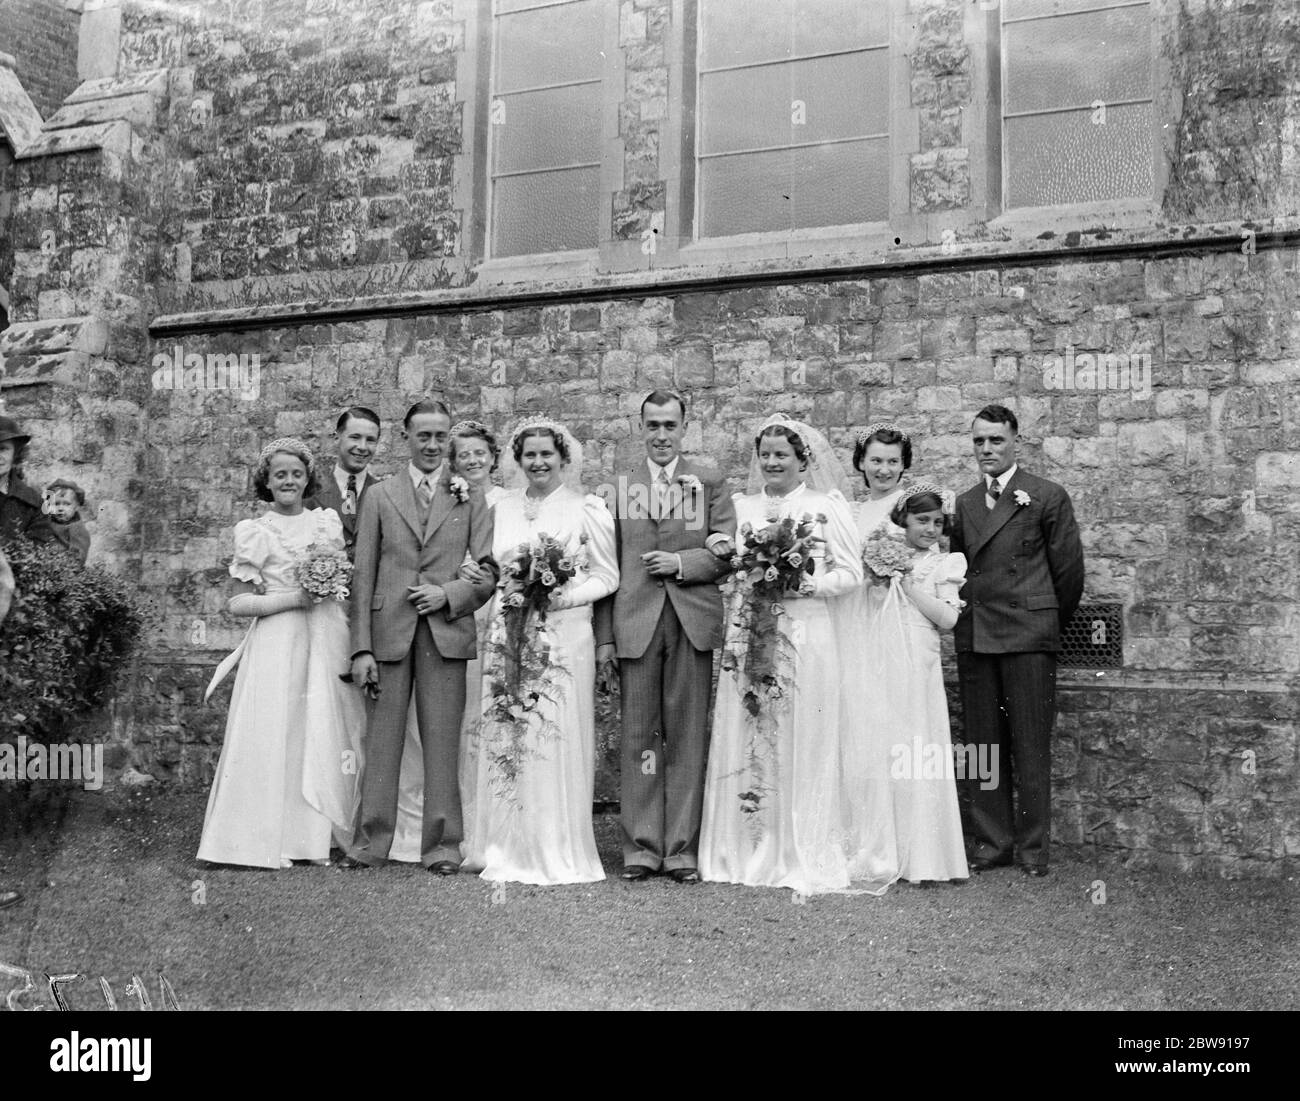 The double wedding of the Wood sisters in Mottingham , Kent . Miss Molly Kathleen Wood with Mr Cyril Leonard Andrew and Mrs Joyce Margaret Wood with Mr John Oliver Staples . 1939 Stock Photo